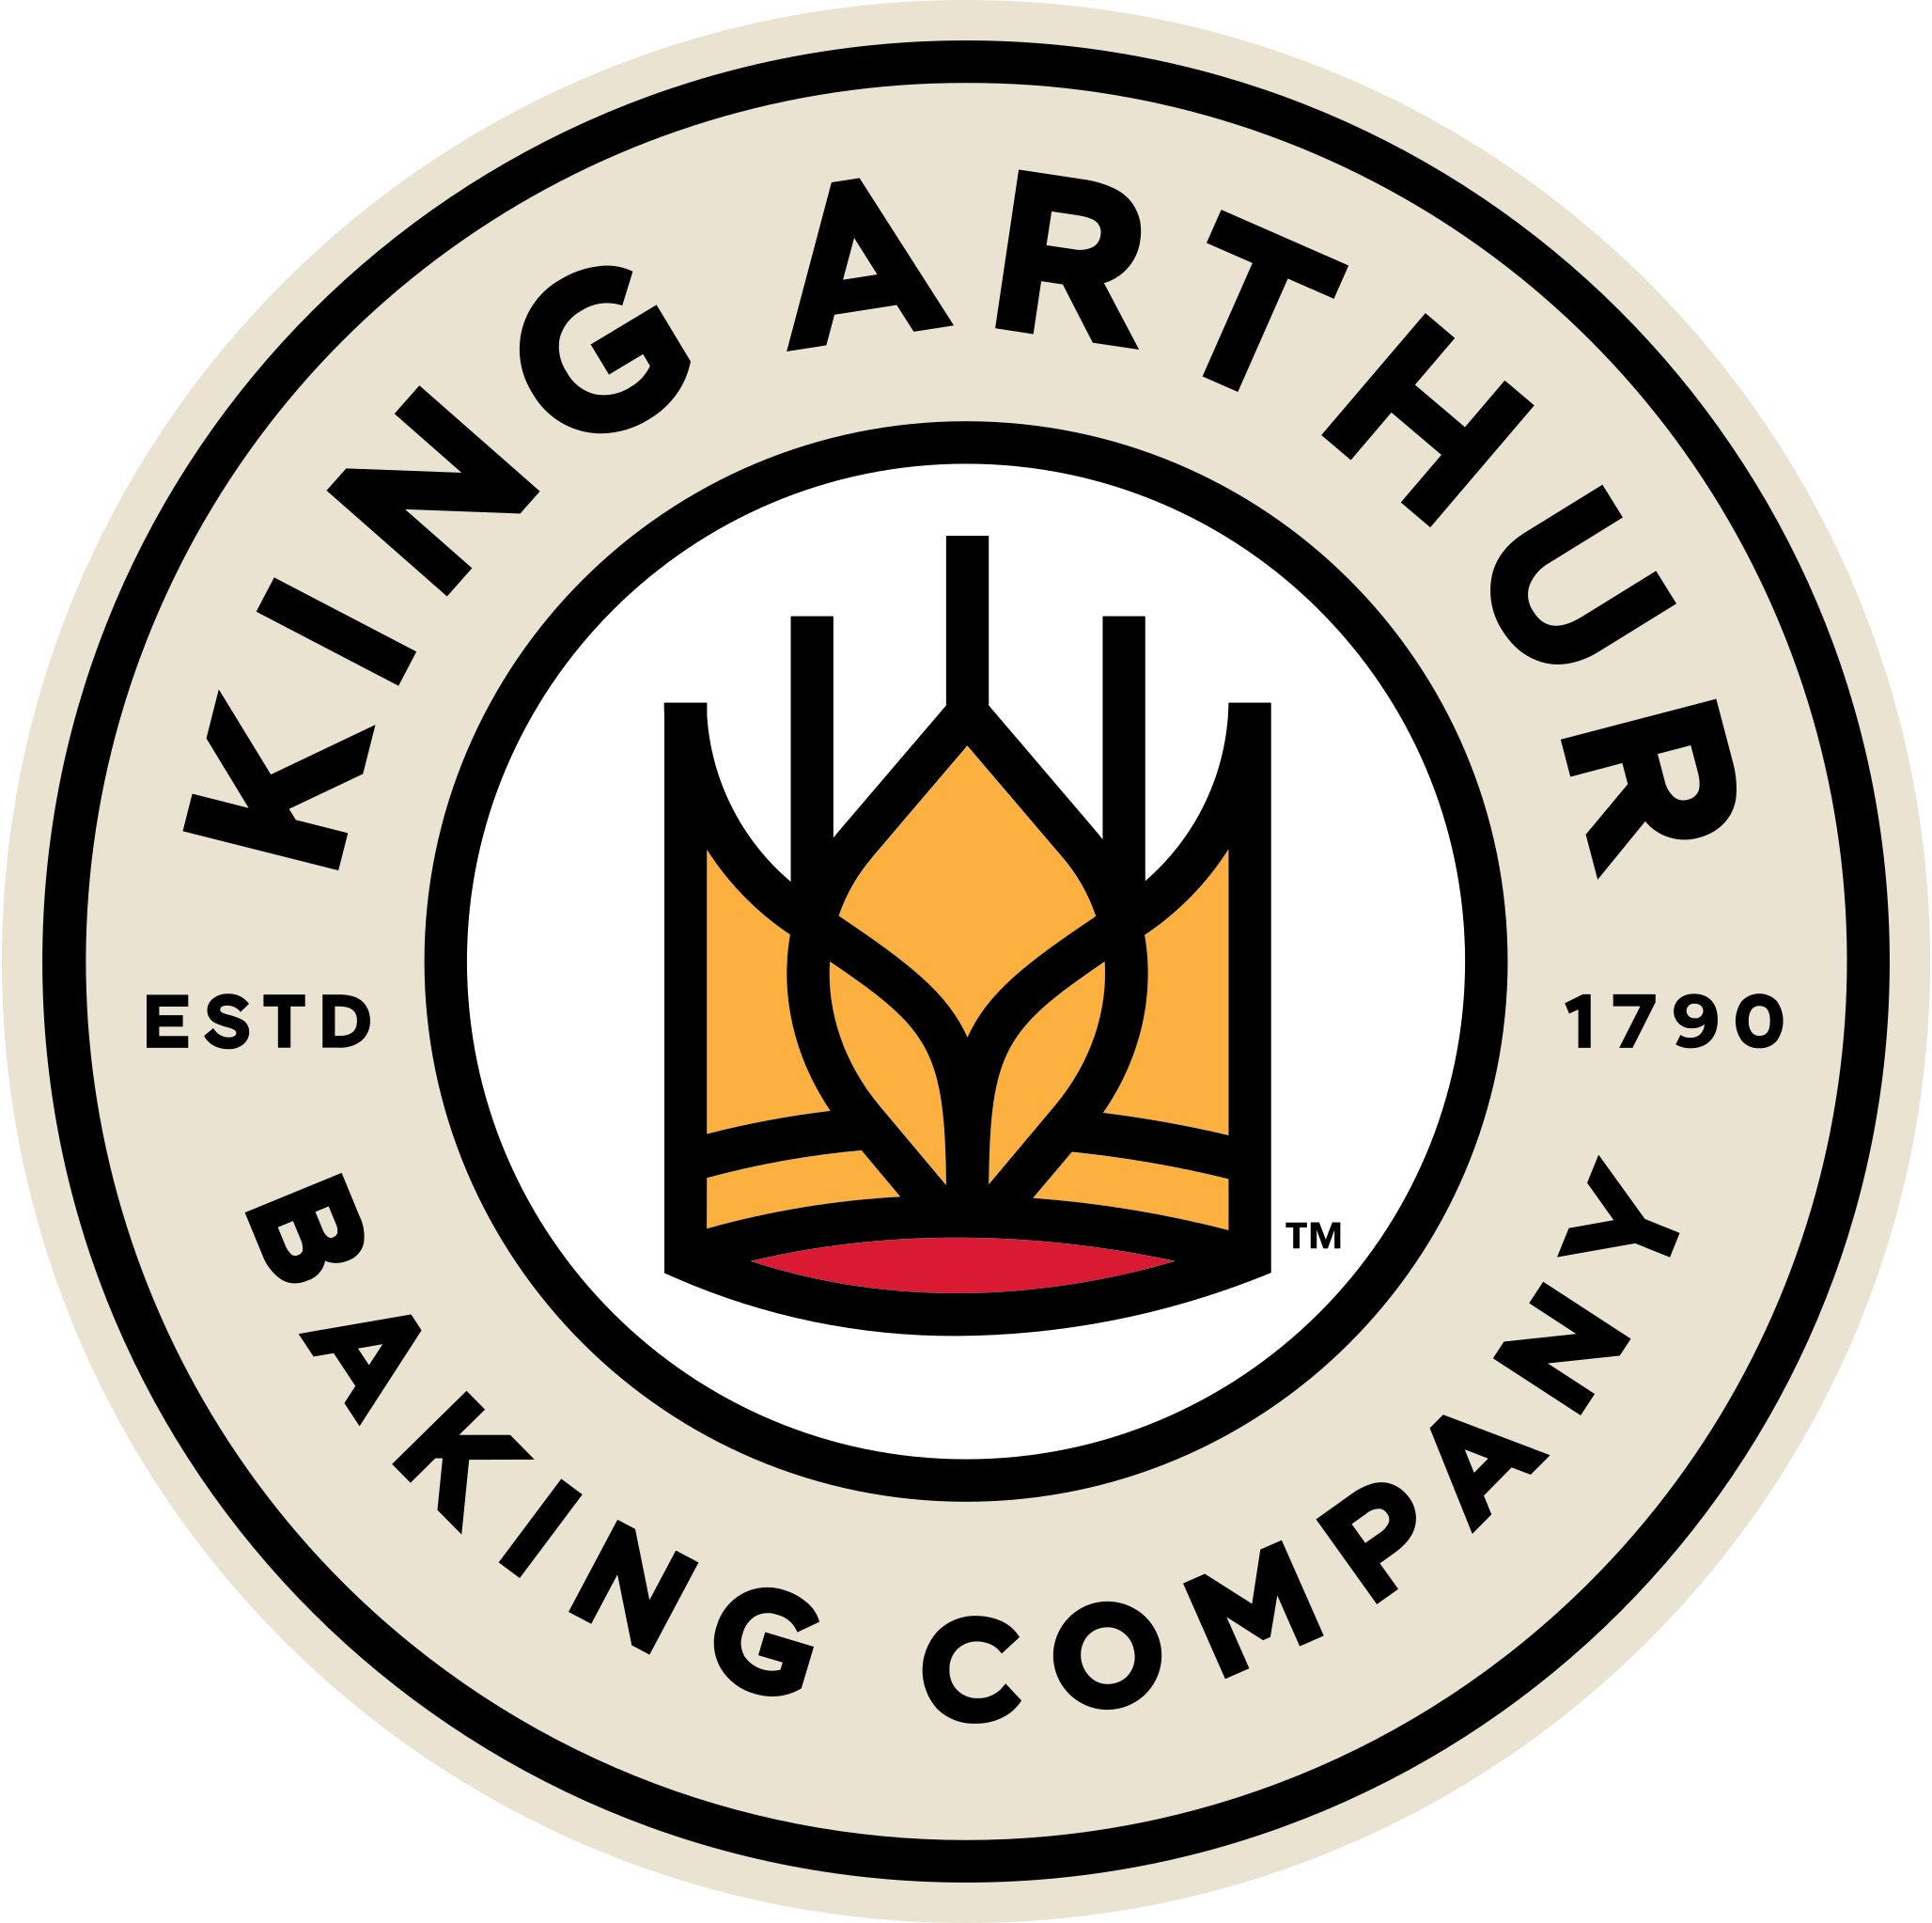 KING ARTHUR BAKING - 10% Off Your First Orders Over $60 for New King Arthur Baking Newsletter Sign Up